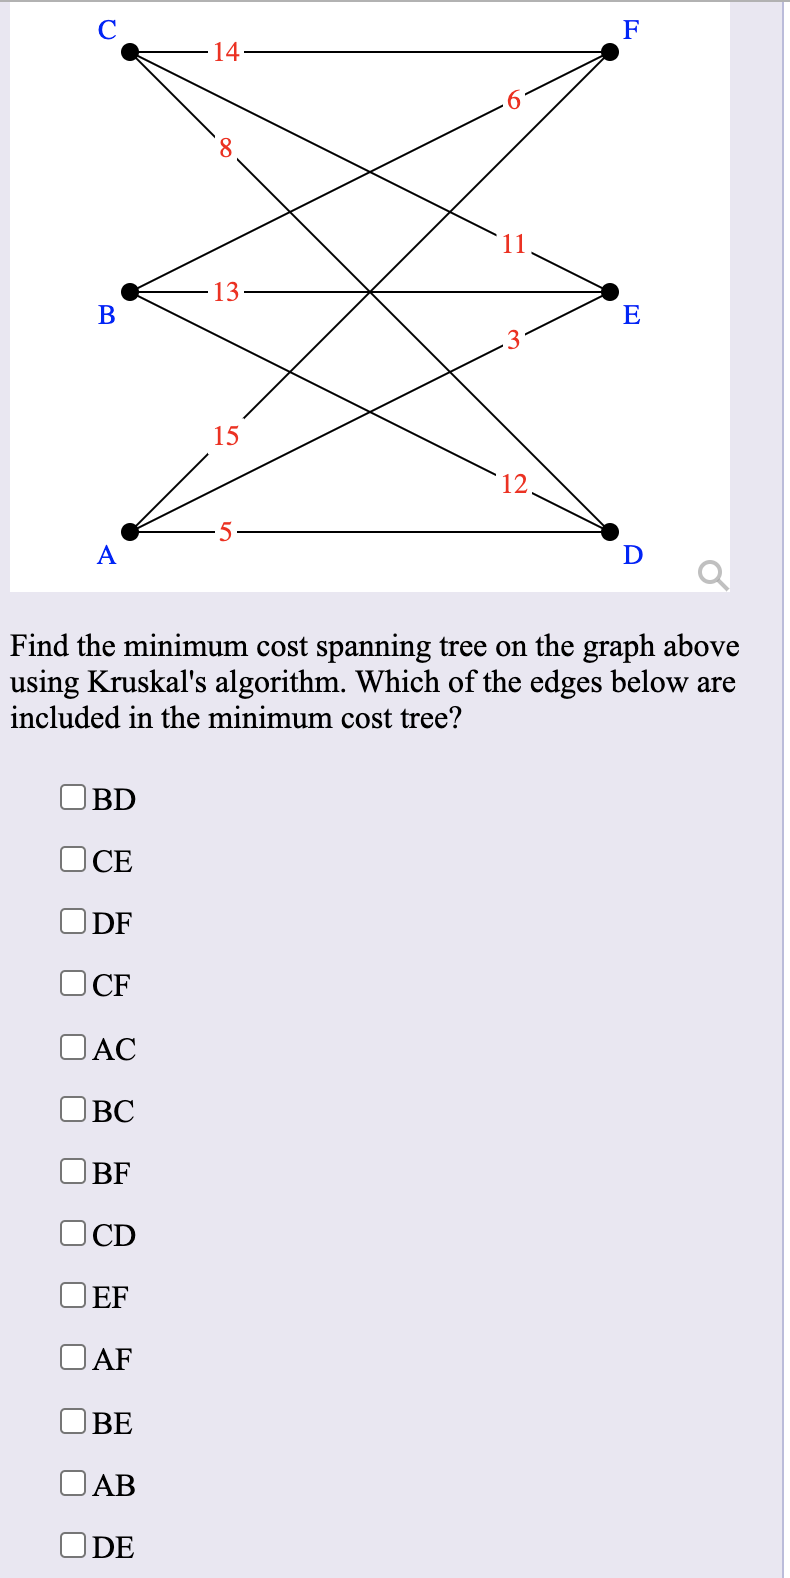 F
14
8.
13
В
E
15
12
A
D
Find the minimum cost spanning tree on the graph above
using Kruskal's algorithm. Which of the edges below are
included in the minimum cost tree?
BD
CE
DF
O CF
O AC
BC
BF
CD
|EF
AF
BE
АВ
ODE
明
